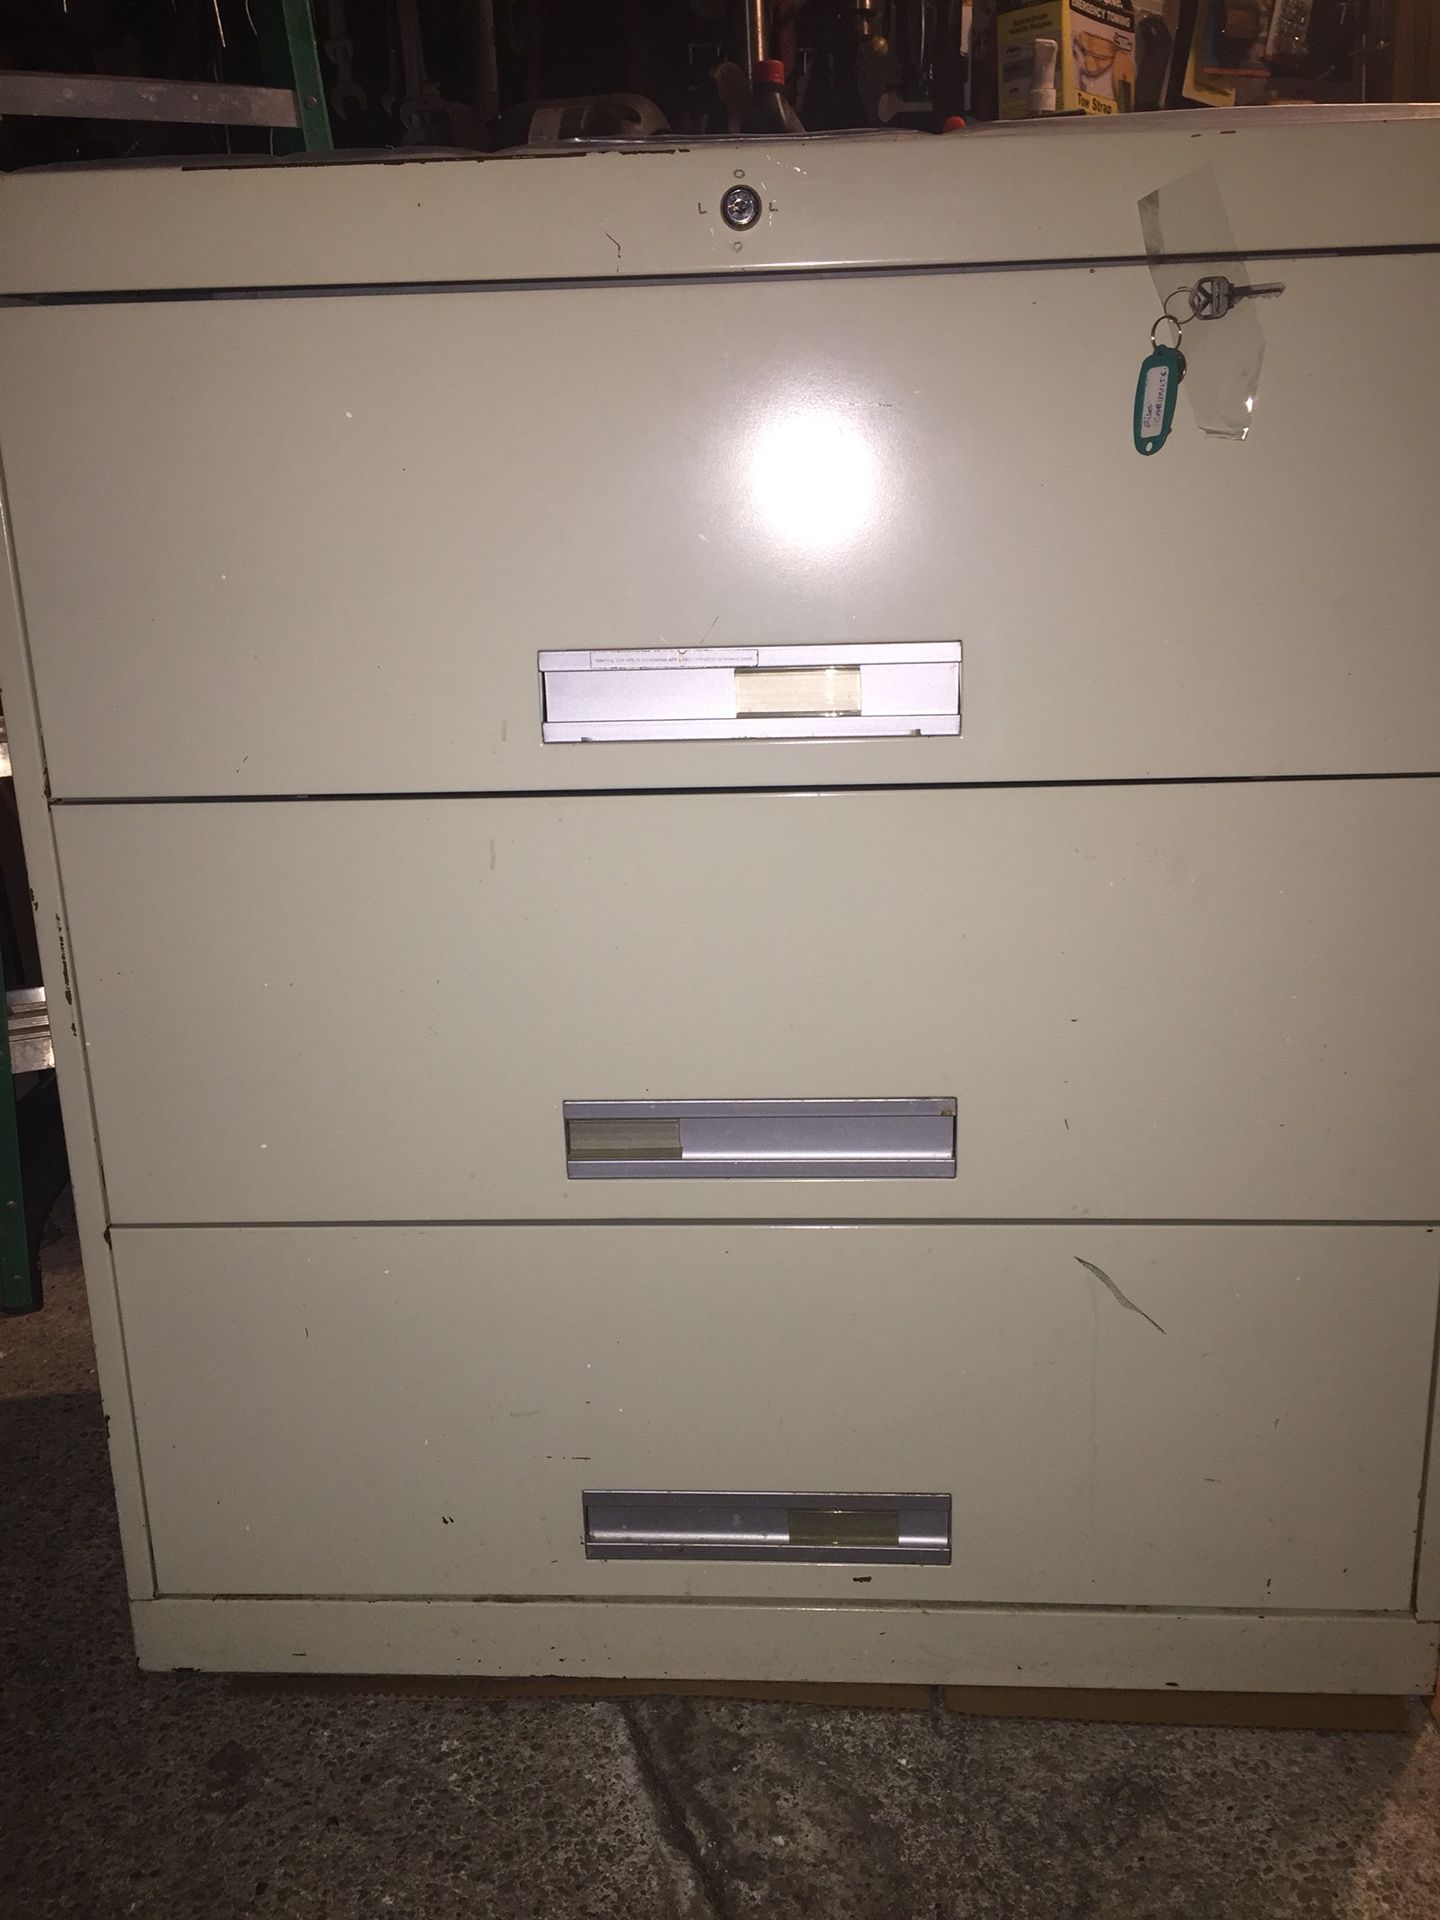 Sandusky 3 drawer filing cabinets 135 lbs H40xW36xD19 free perfect condition I live in Arlington Va